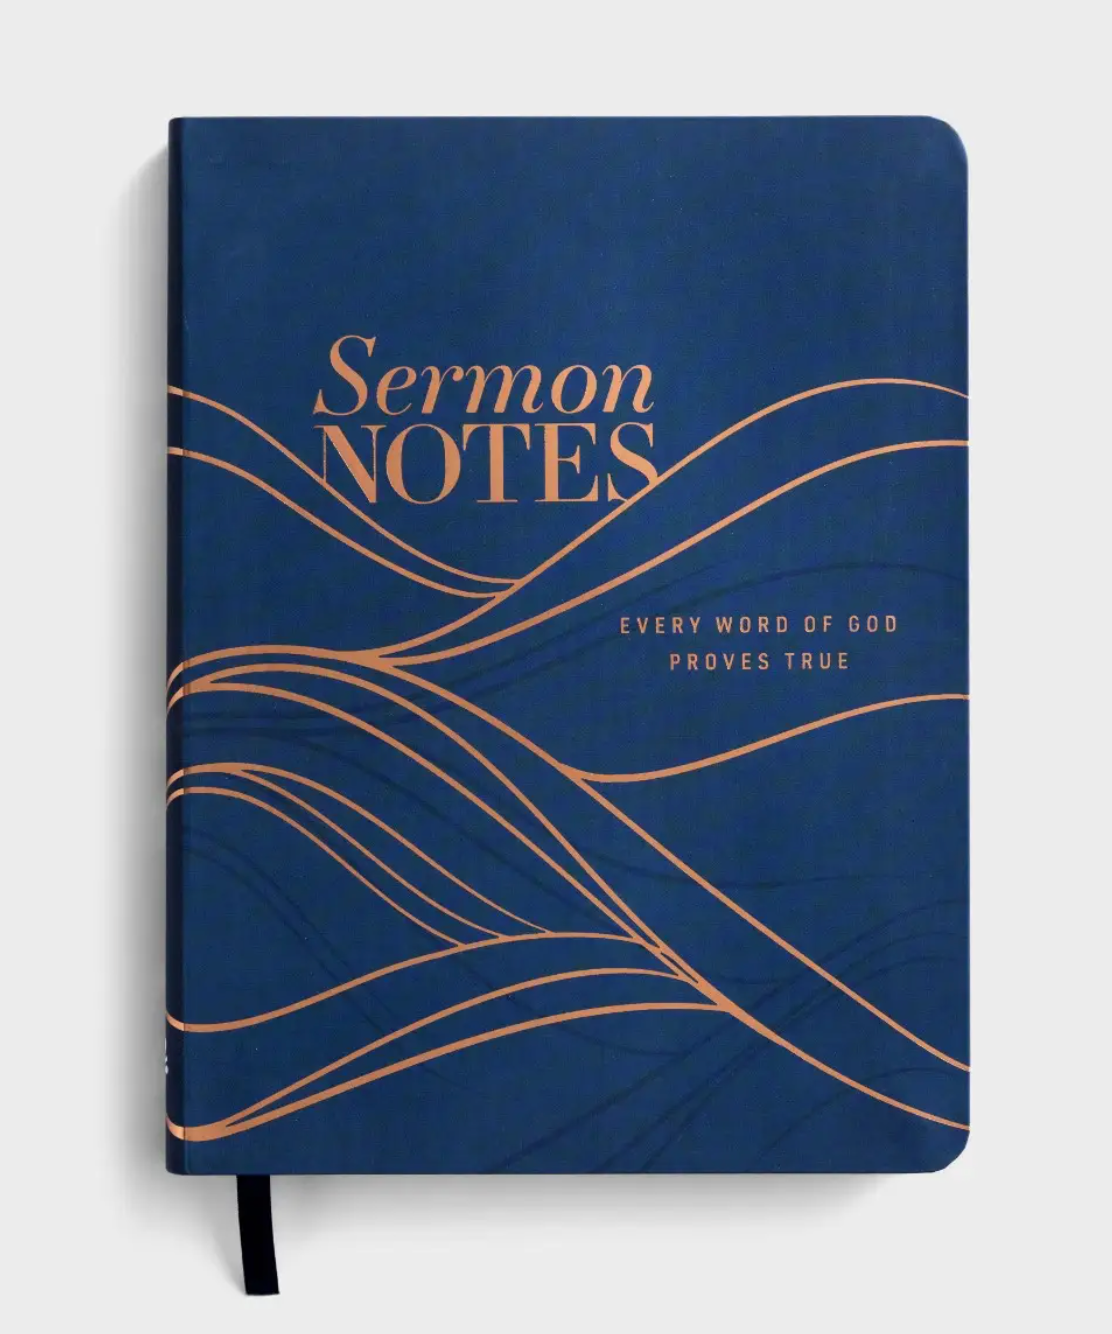 Sermon Notes: Every word of God Proves True